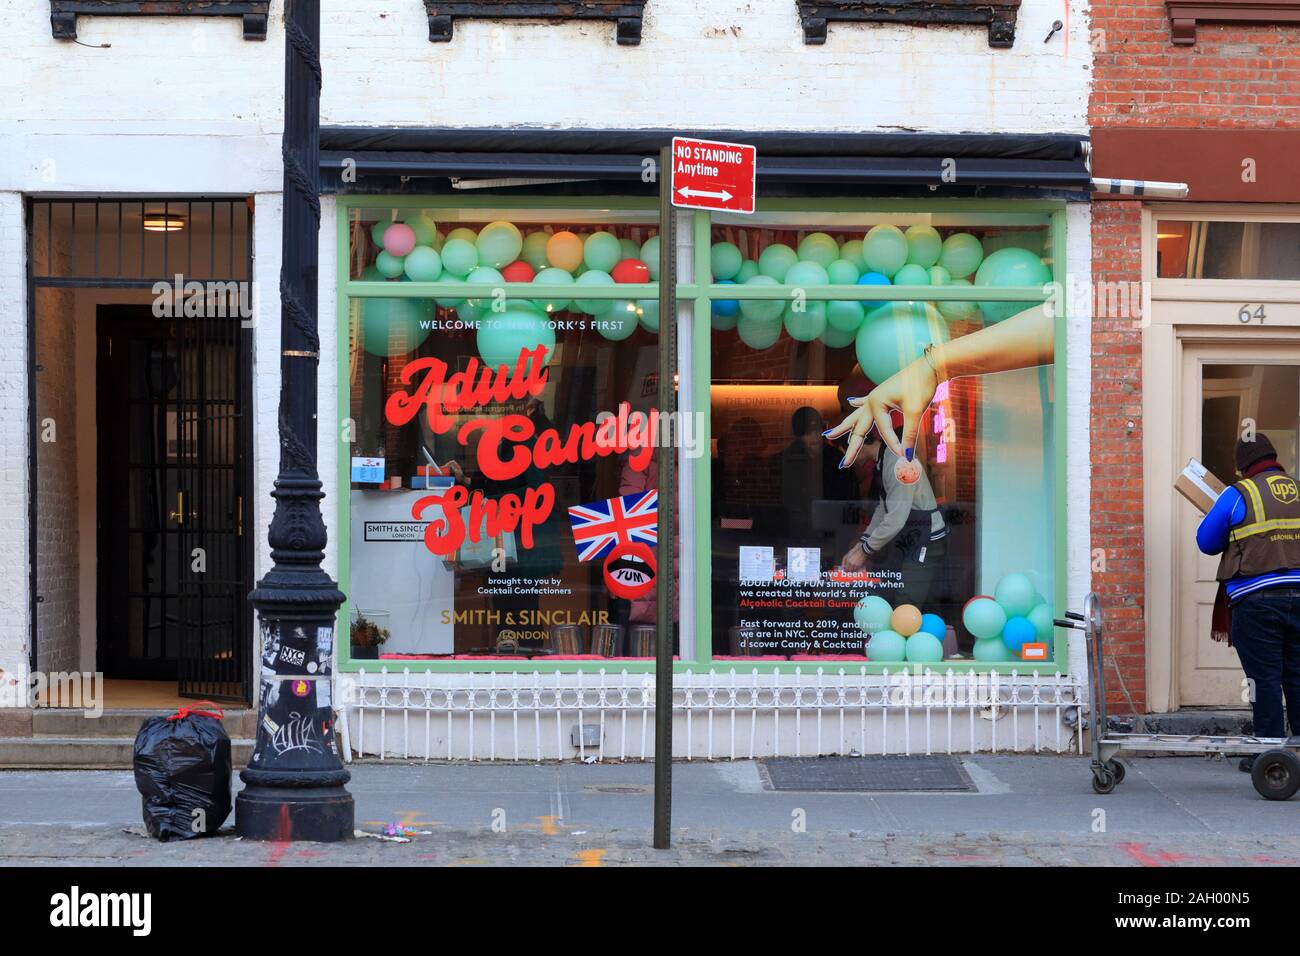 [historical storefront] Smith & Sinclair pop-up, 66 Greenwich Ave, New York, NYC. A pop-up British store selling alcoholic candy and confections. Stock Photo